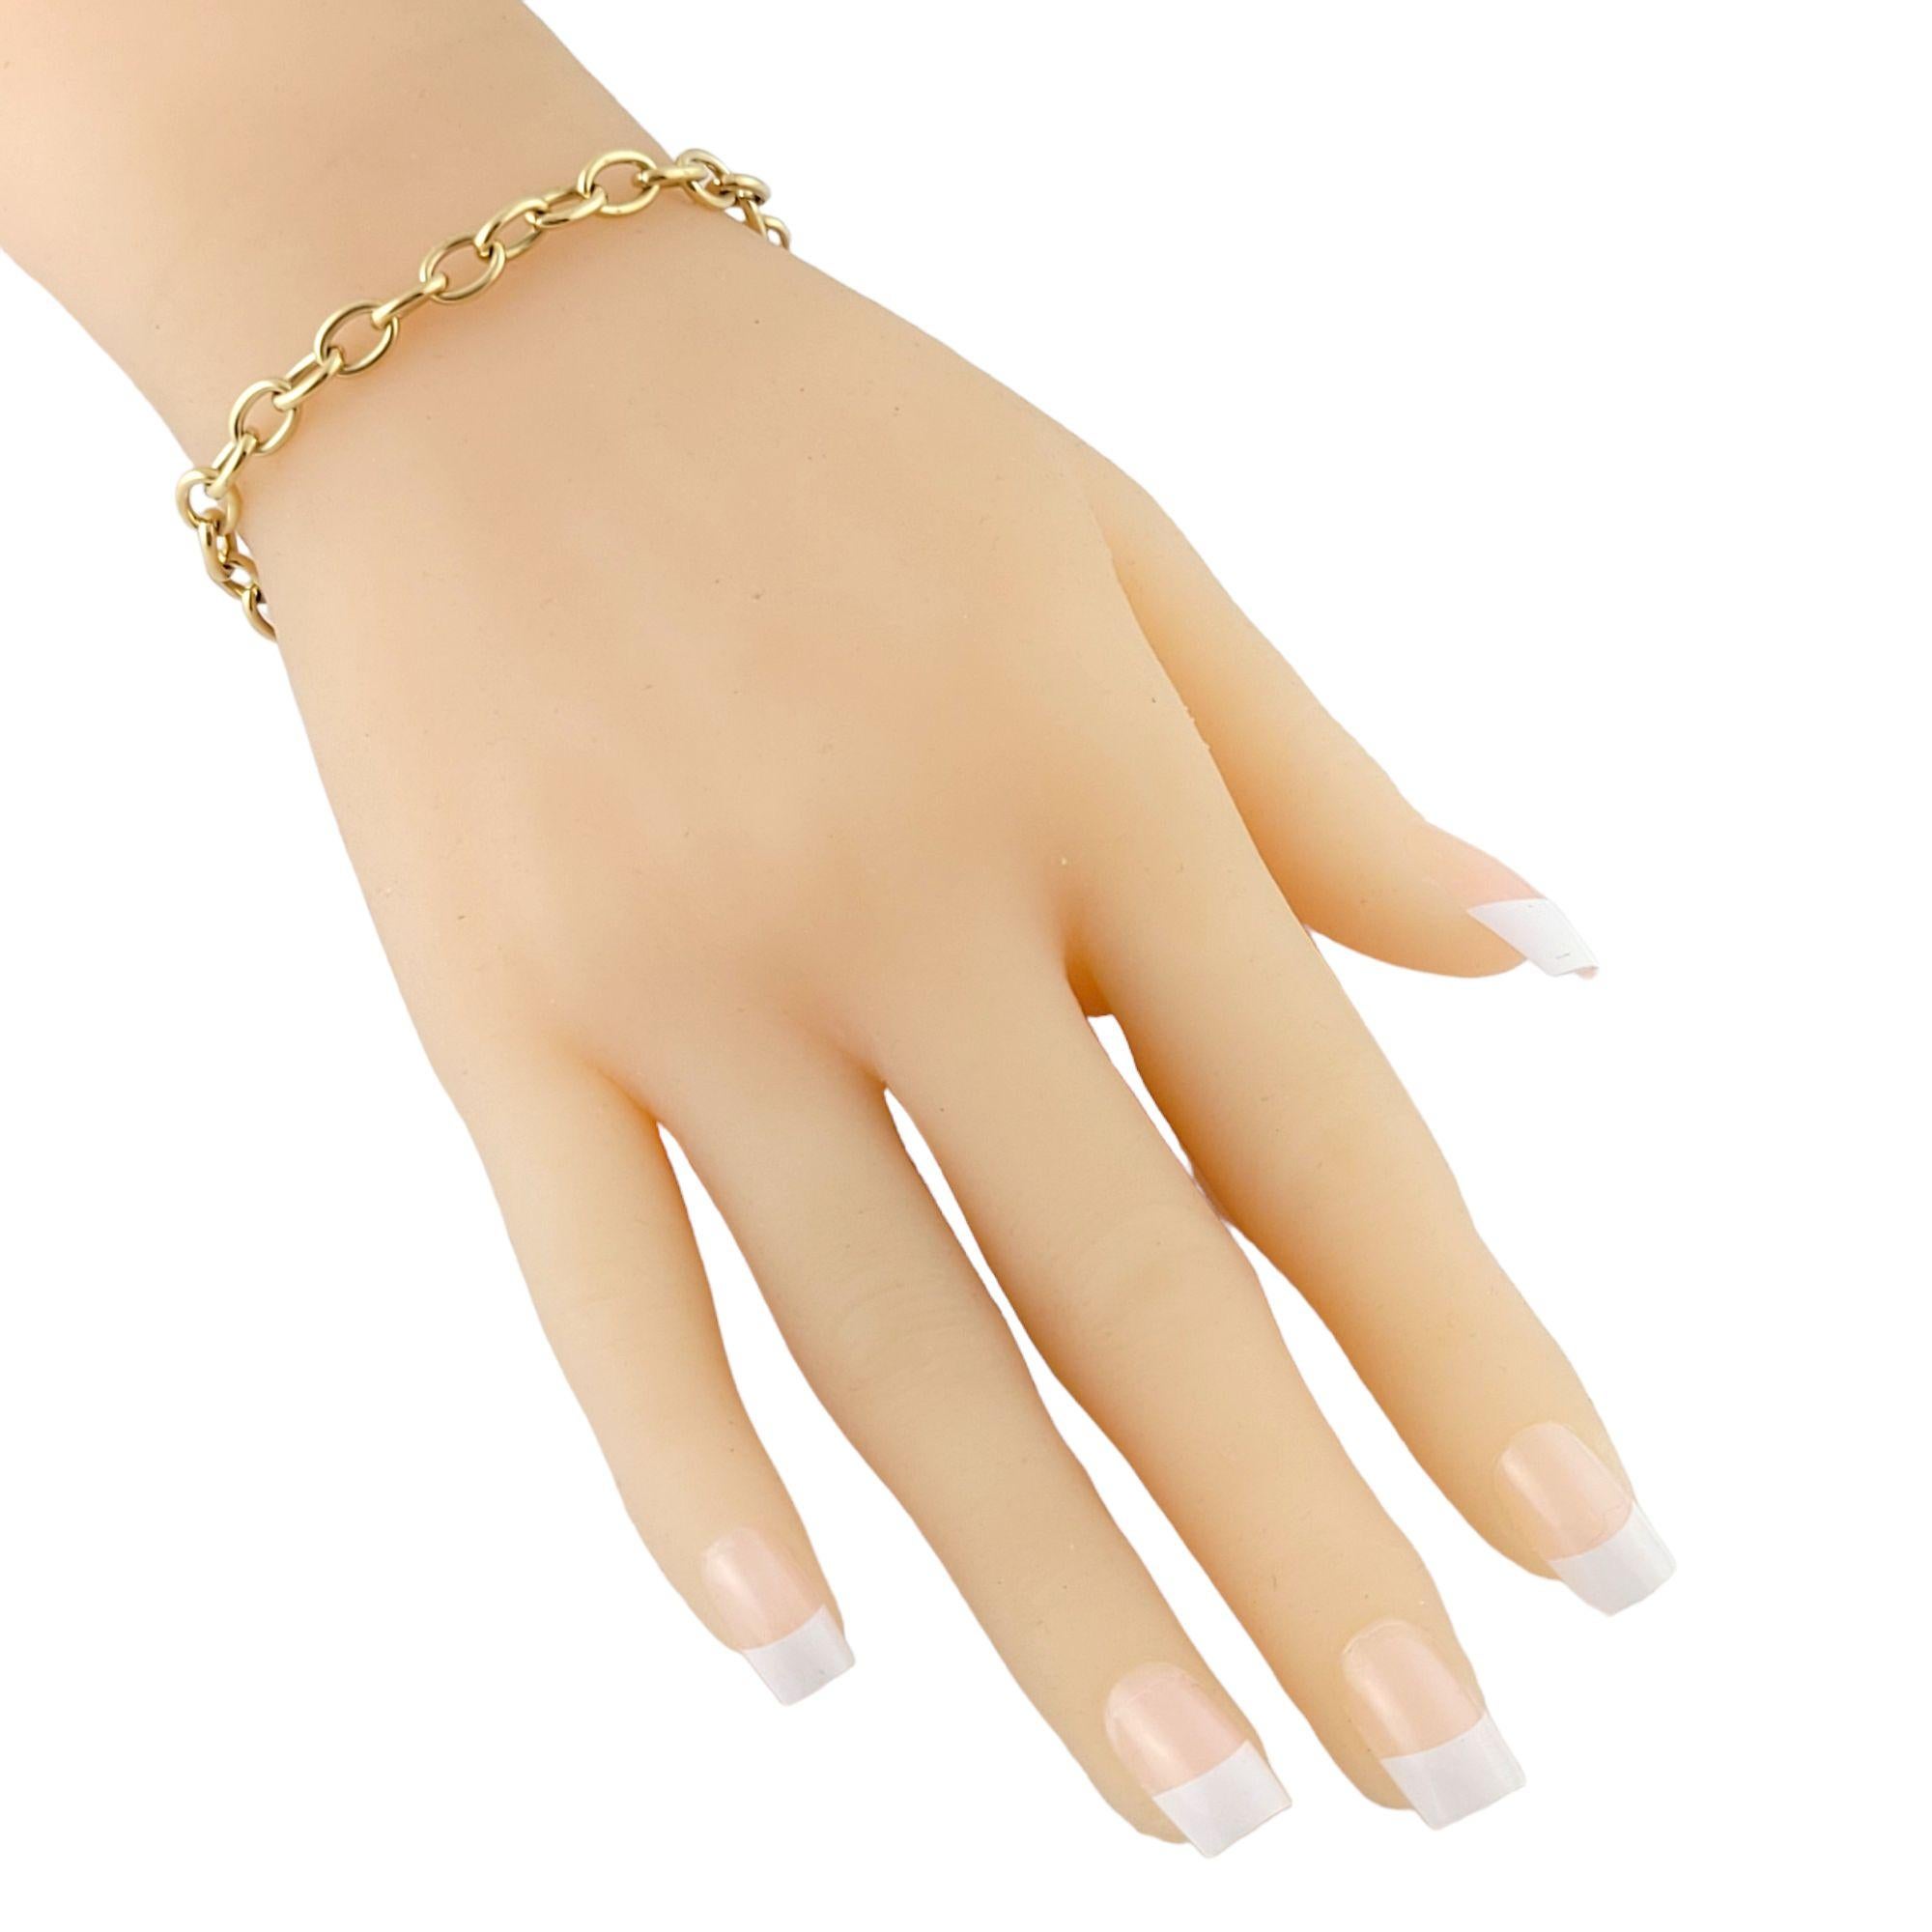 Vintage 14K Yellow Gold Oval Link Bracelet

This classic 14K yellow gold link chain bracelet has a gorgeous look!

Size: 7